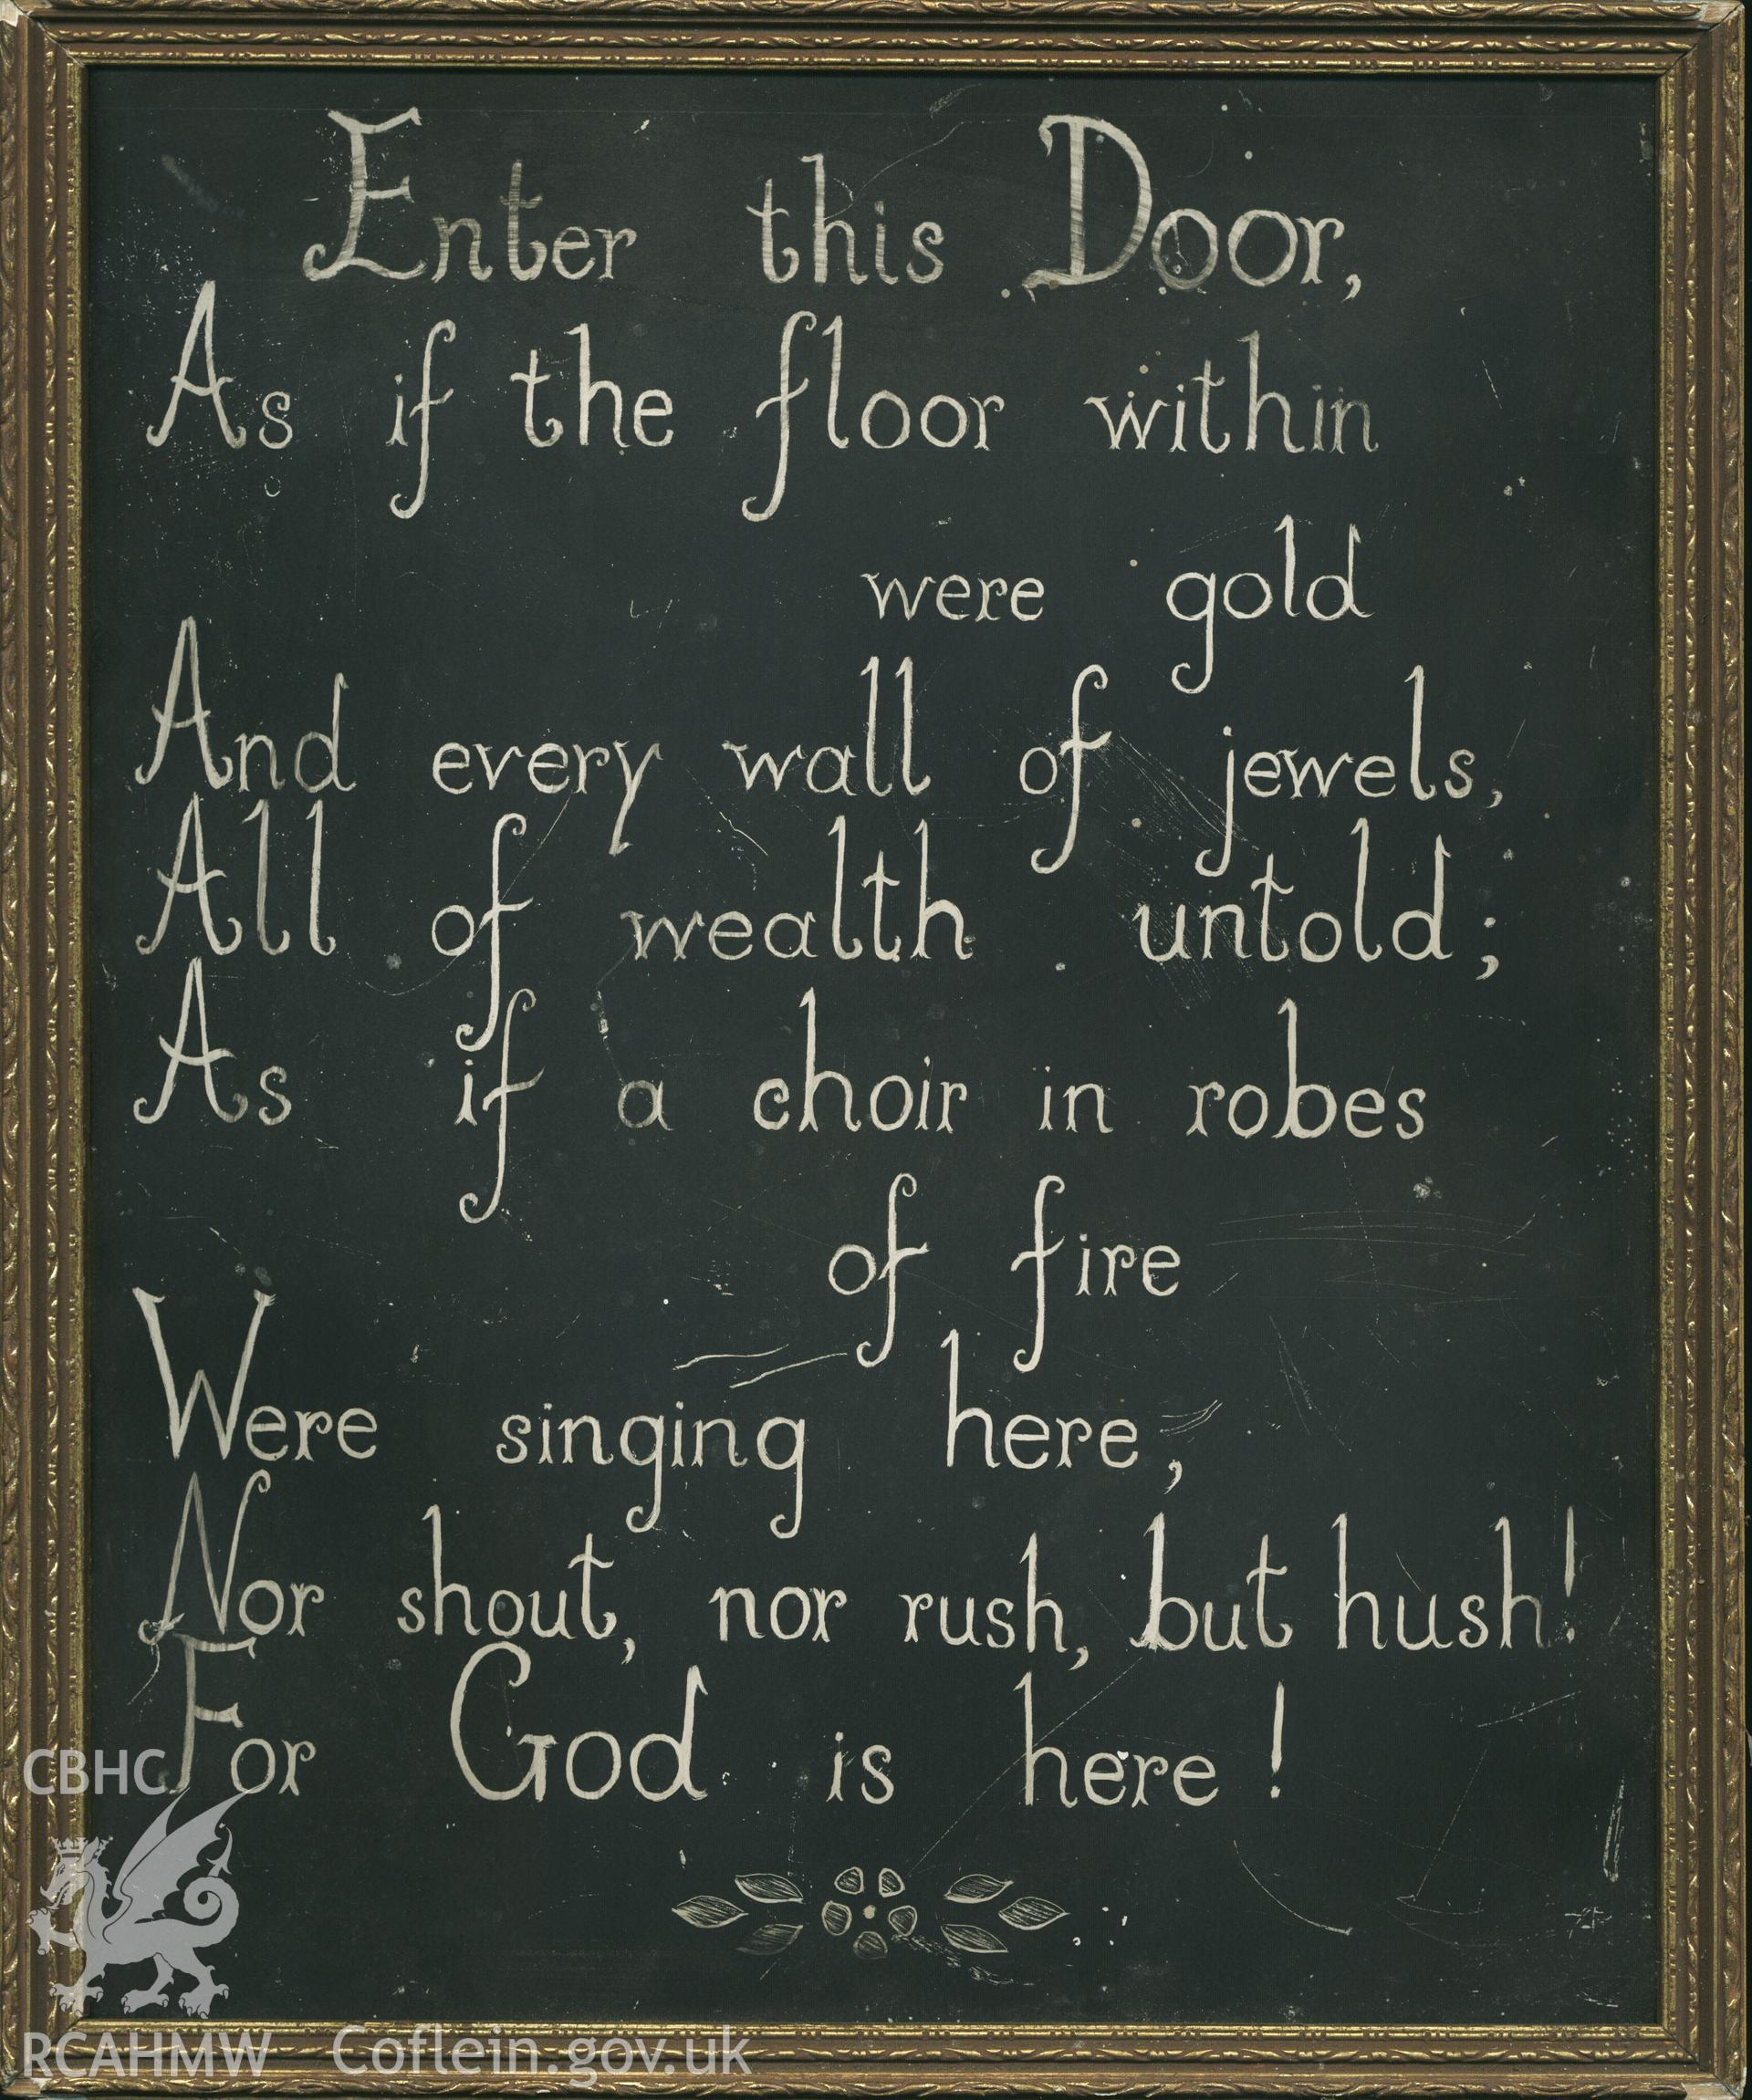 Plaque written by Miss Ella Walden, Headmistress of the girl's junior comprehensive school, to put people in the 'right' mood for the service. Donated to the RCAHMW by Cyril Philips as part of the Digital Dissent Project.